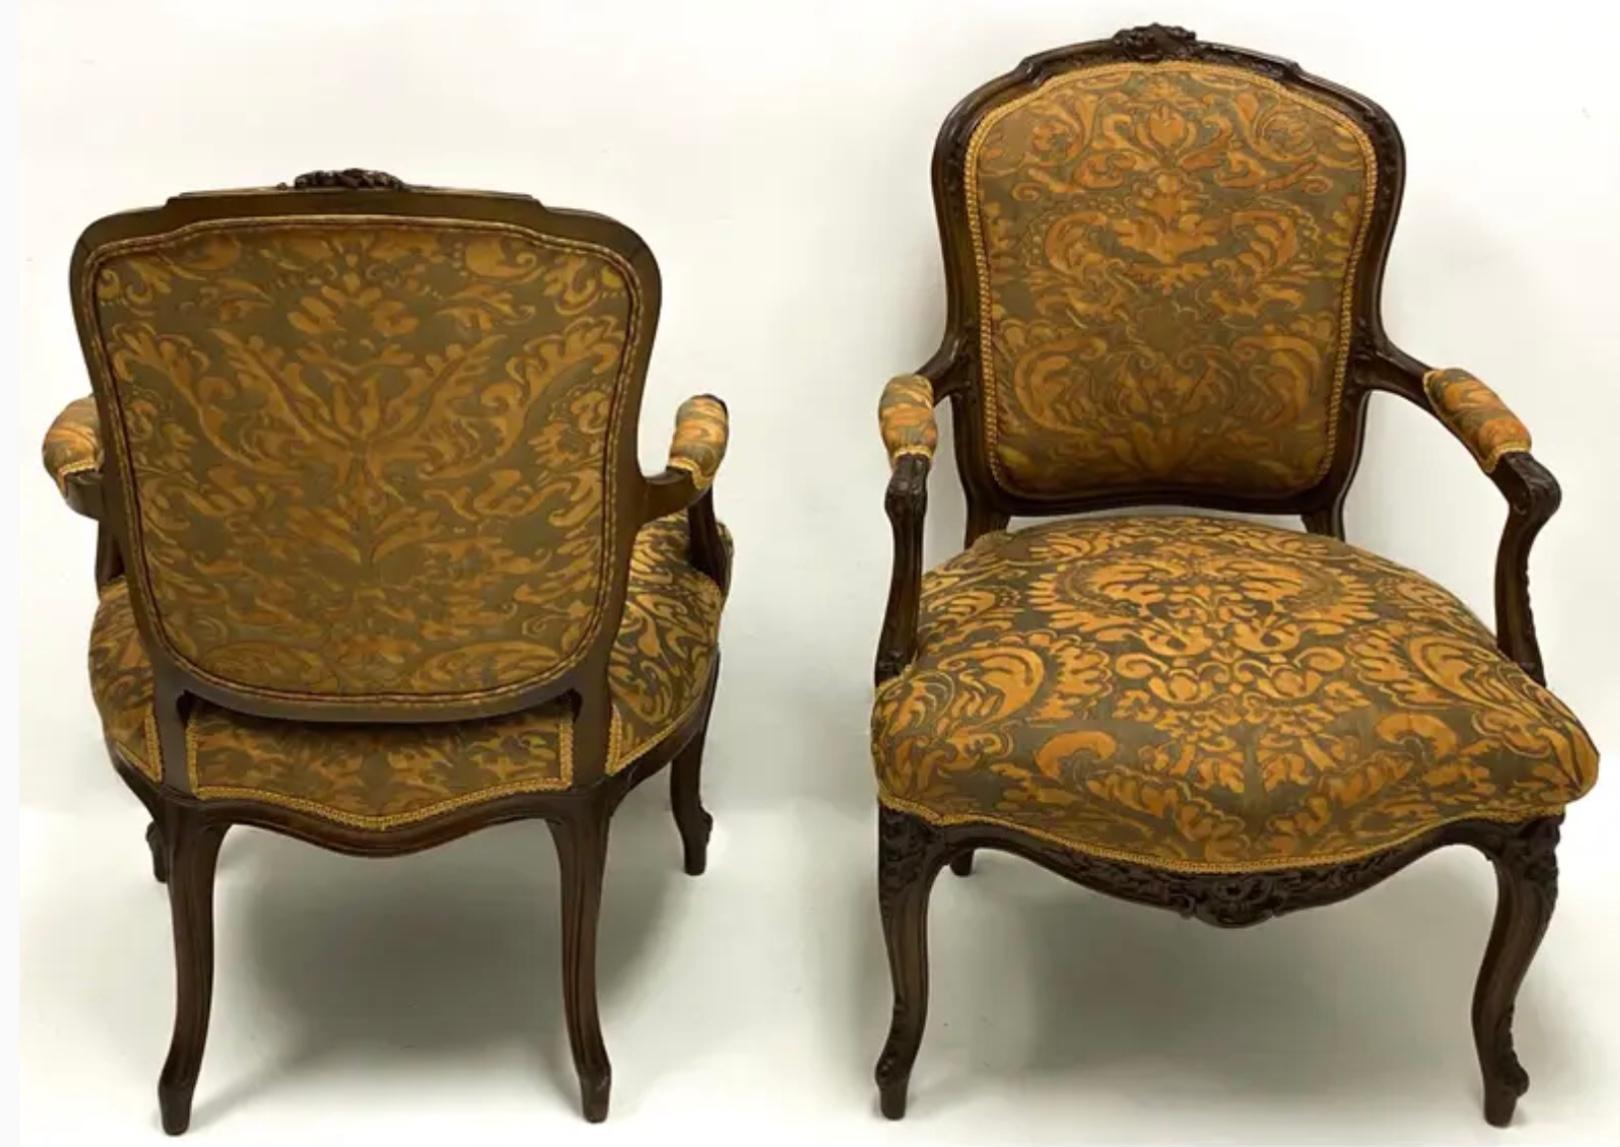 19th Century 19th-C Carved French Bergere Chairs in Silk Fortuny Fabric, Pair